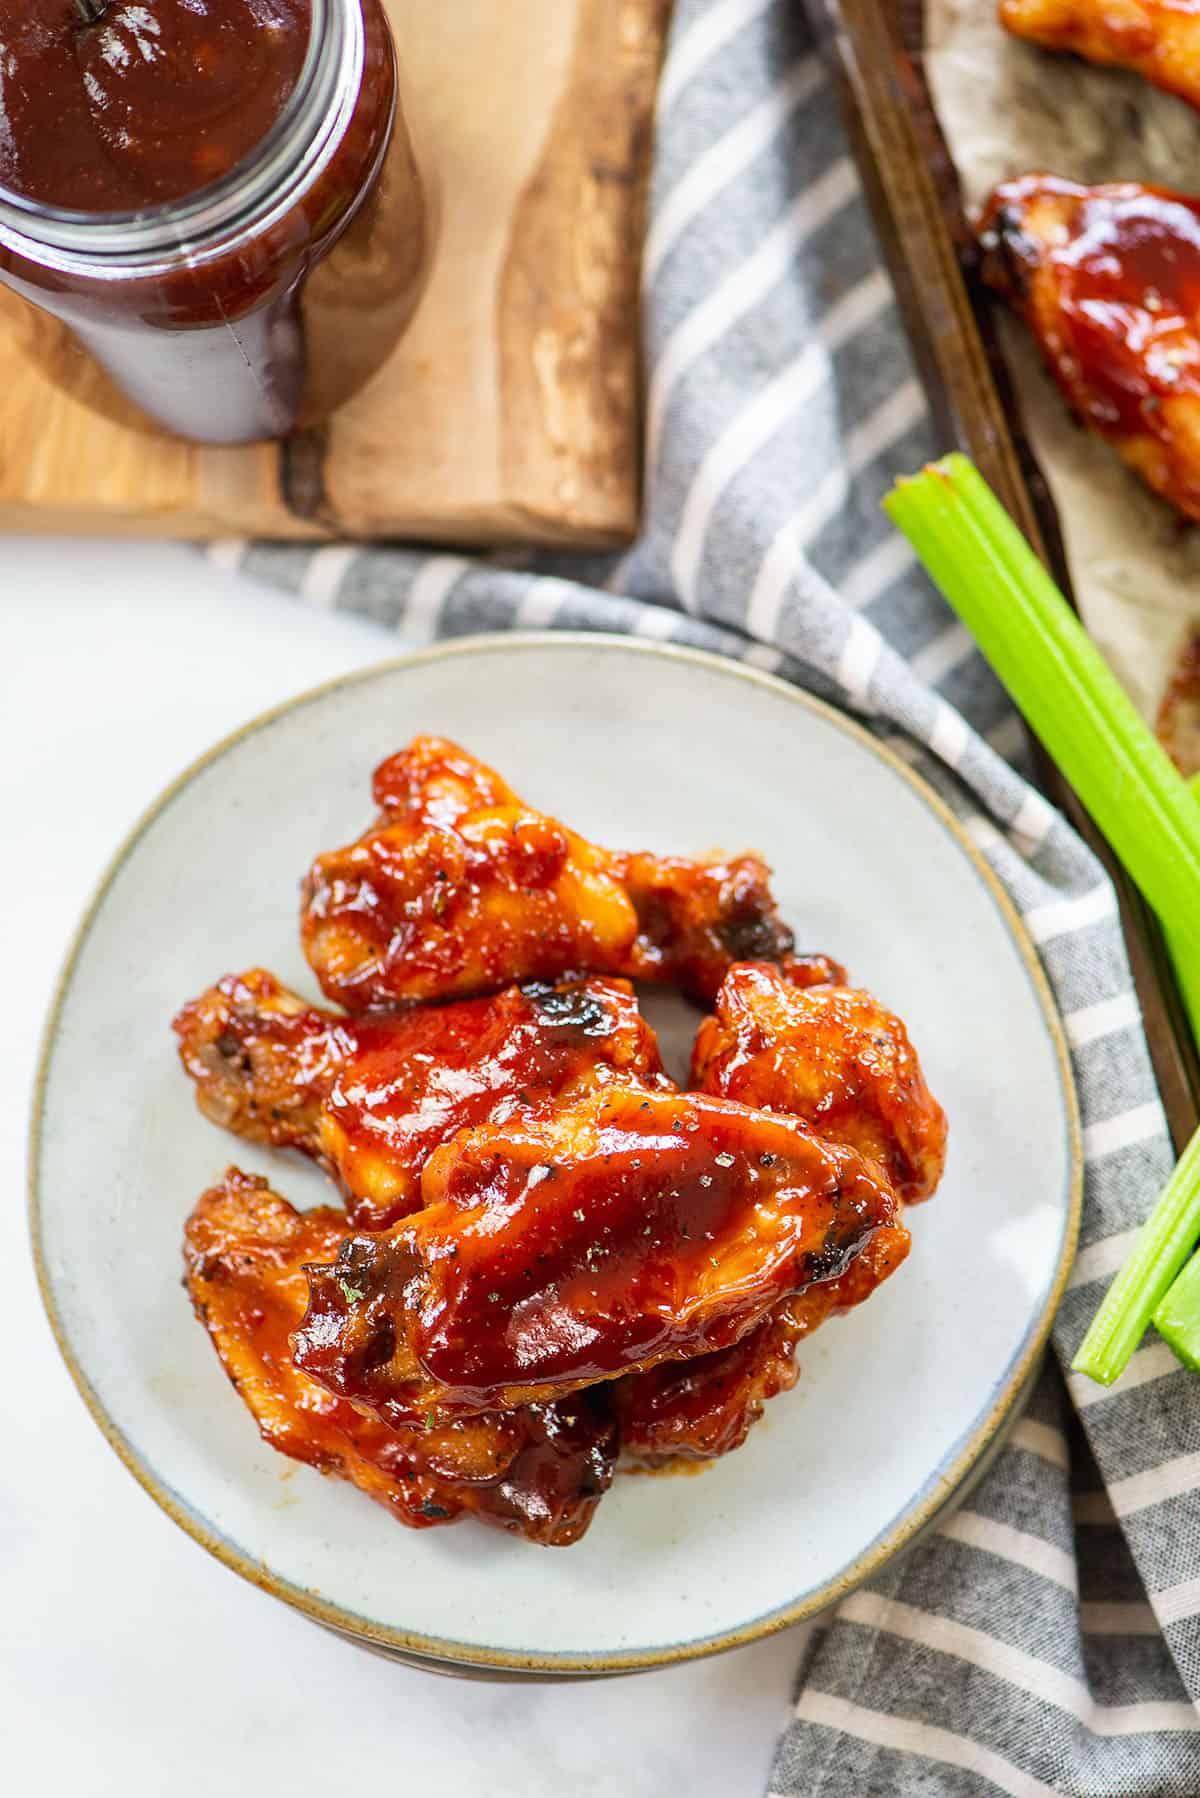 Baked BBQ chicken wings on plate.